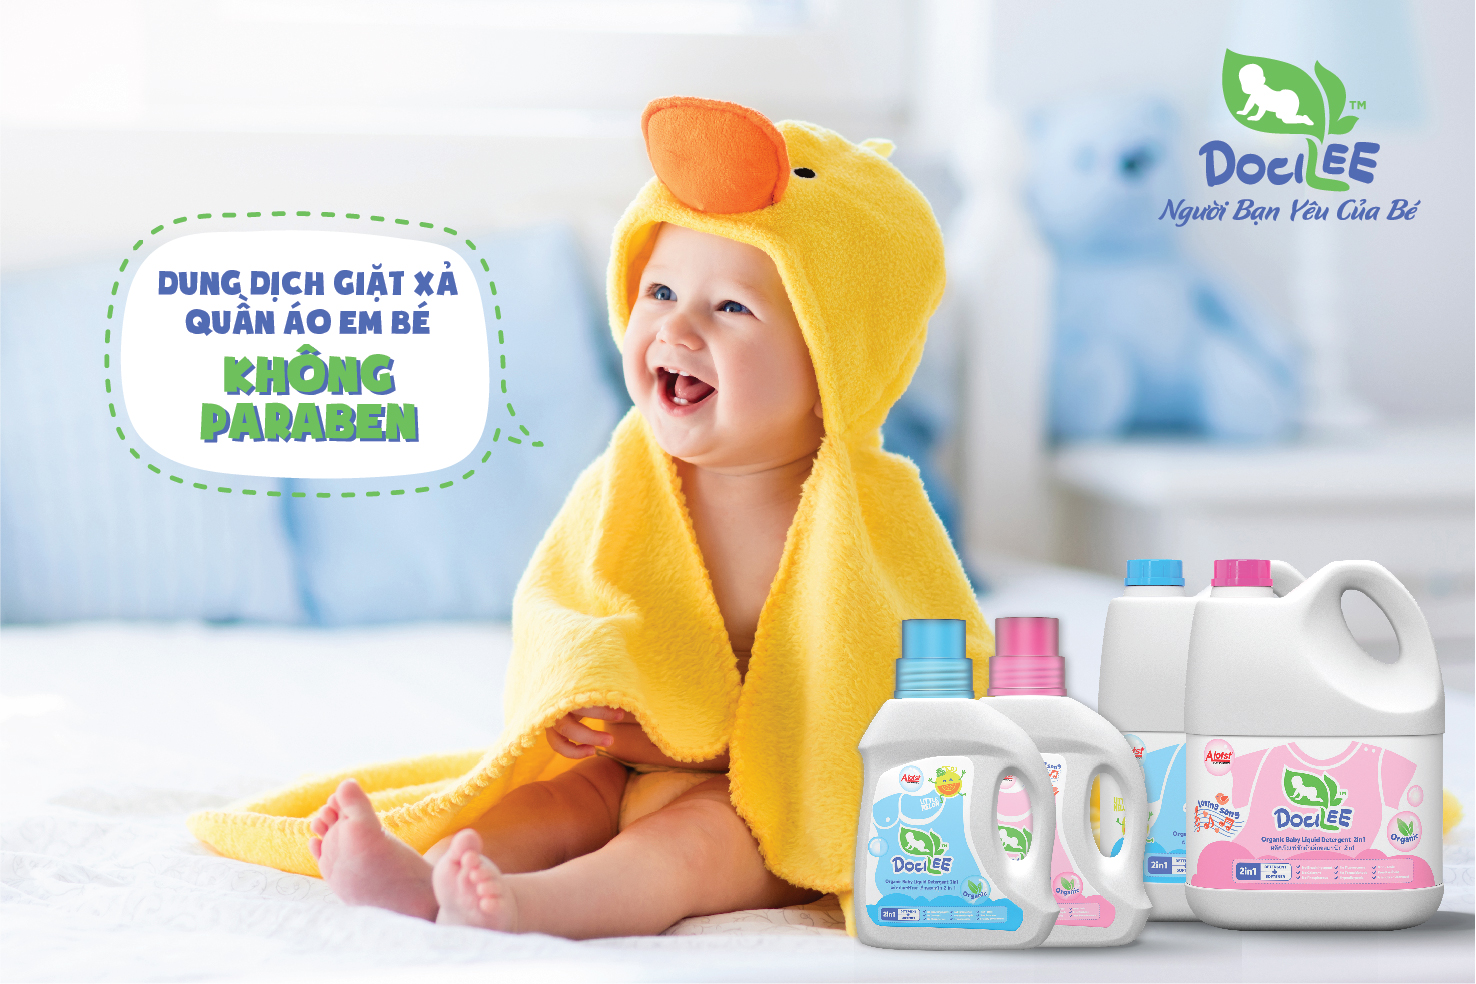 Note: Do not use products containing Paraben for babies